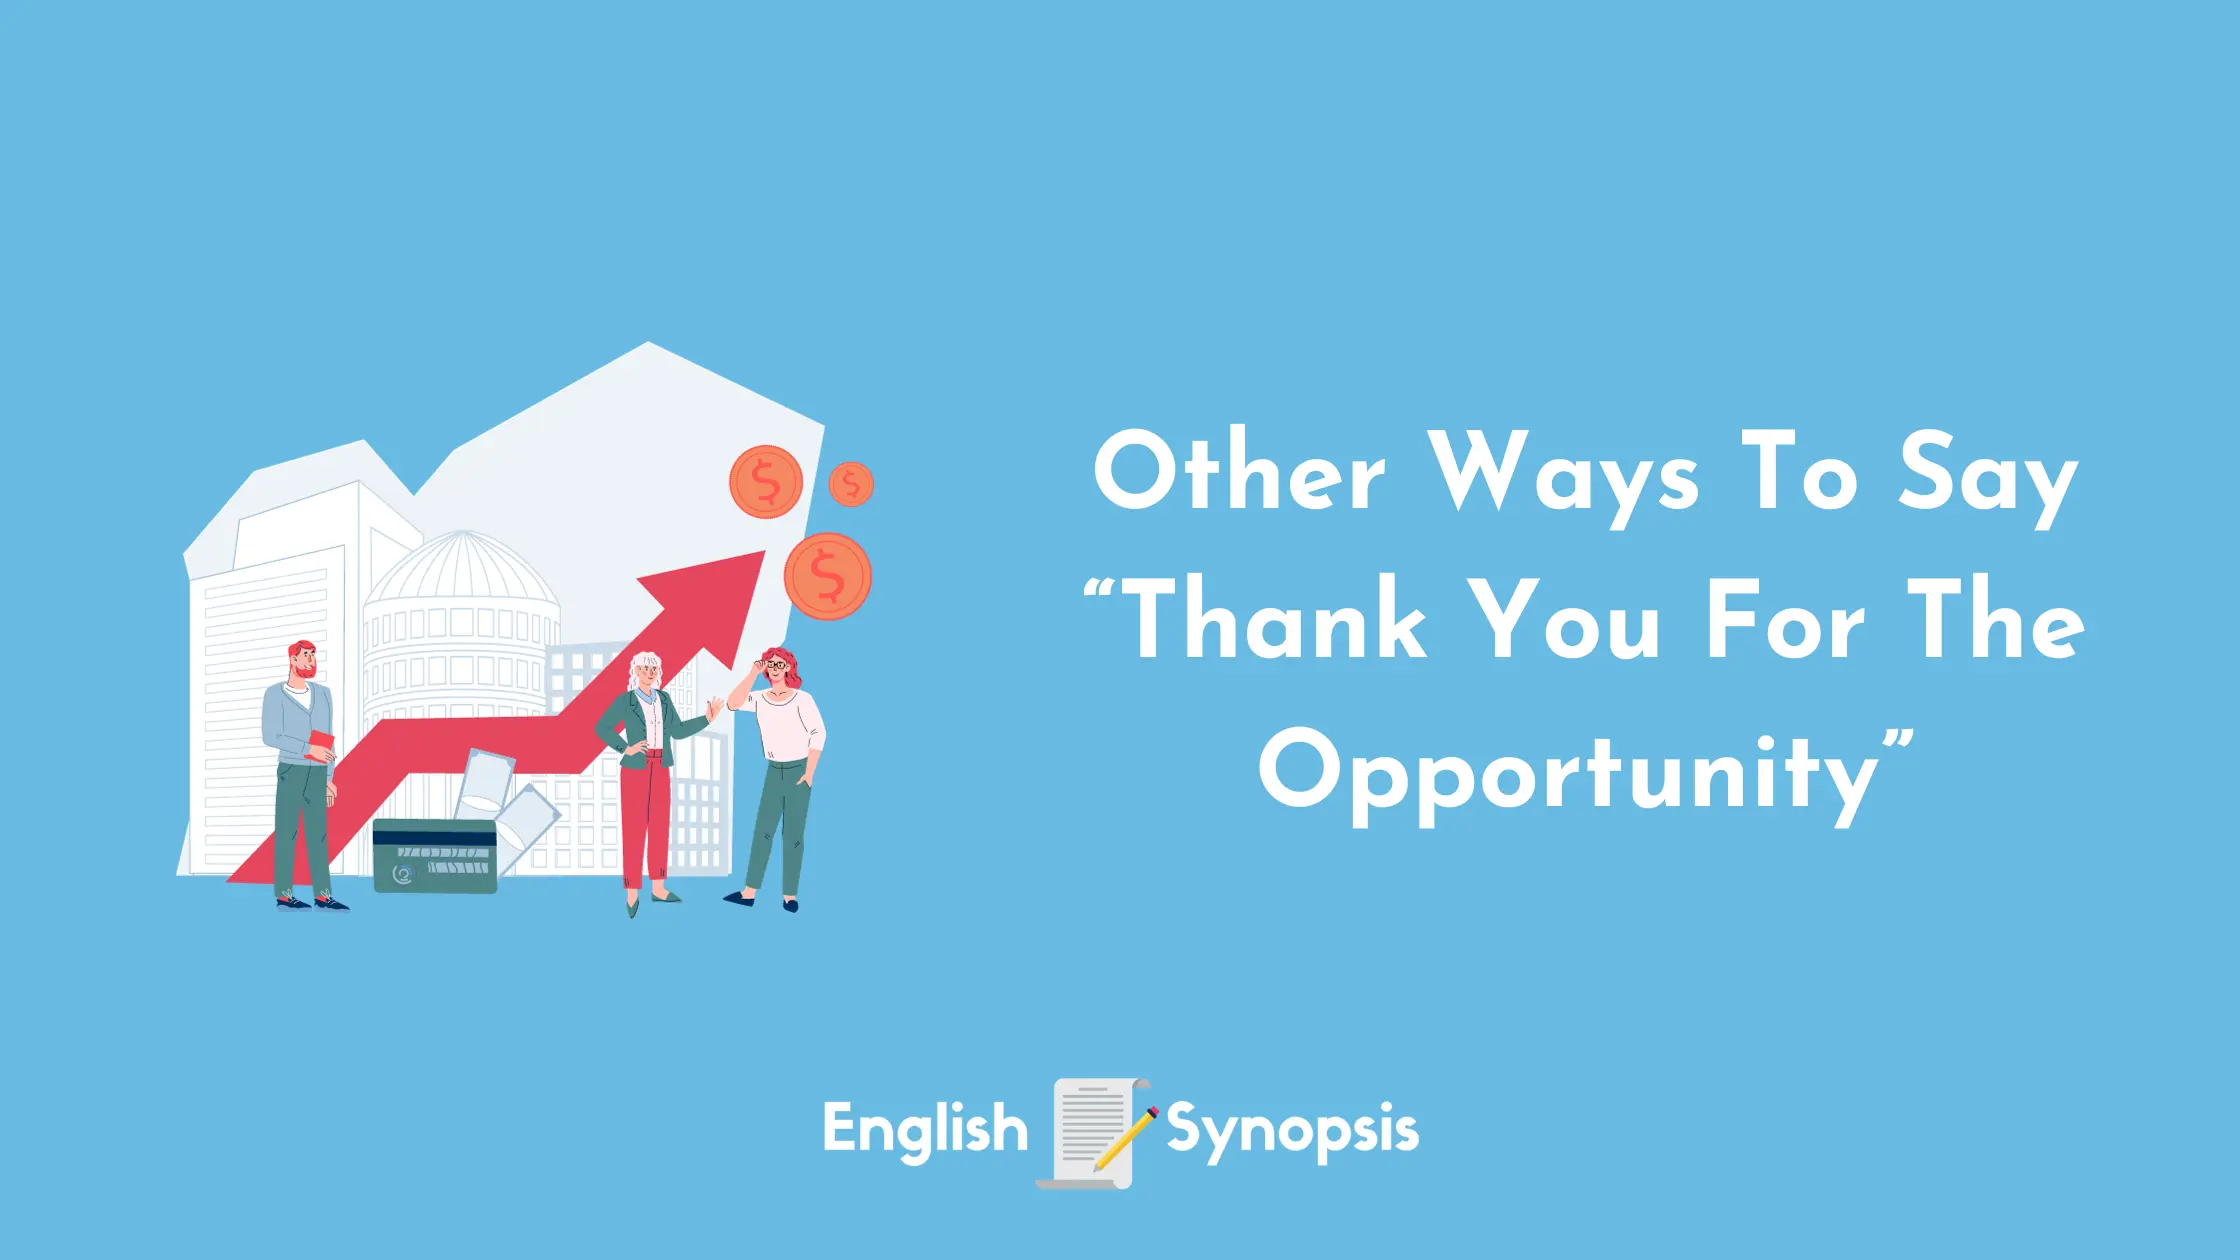 Other Ways To Say "Thank You For The Opportunity"